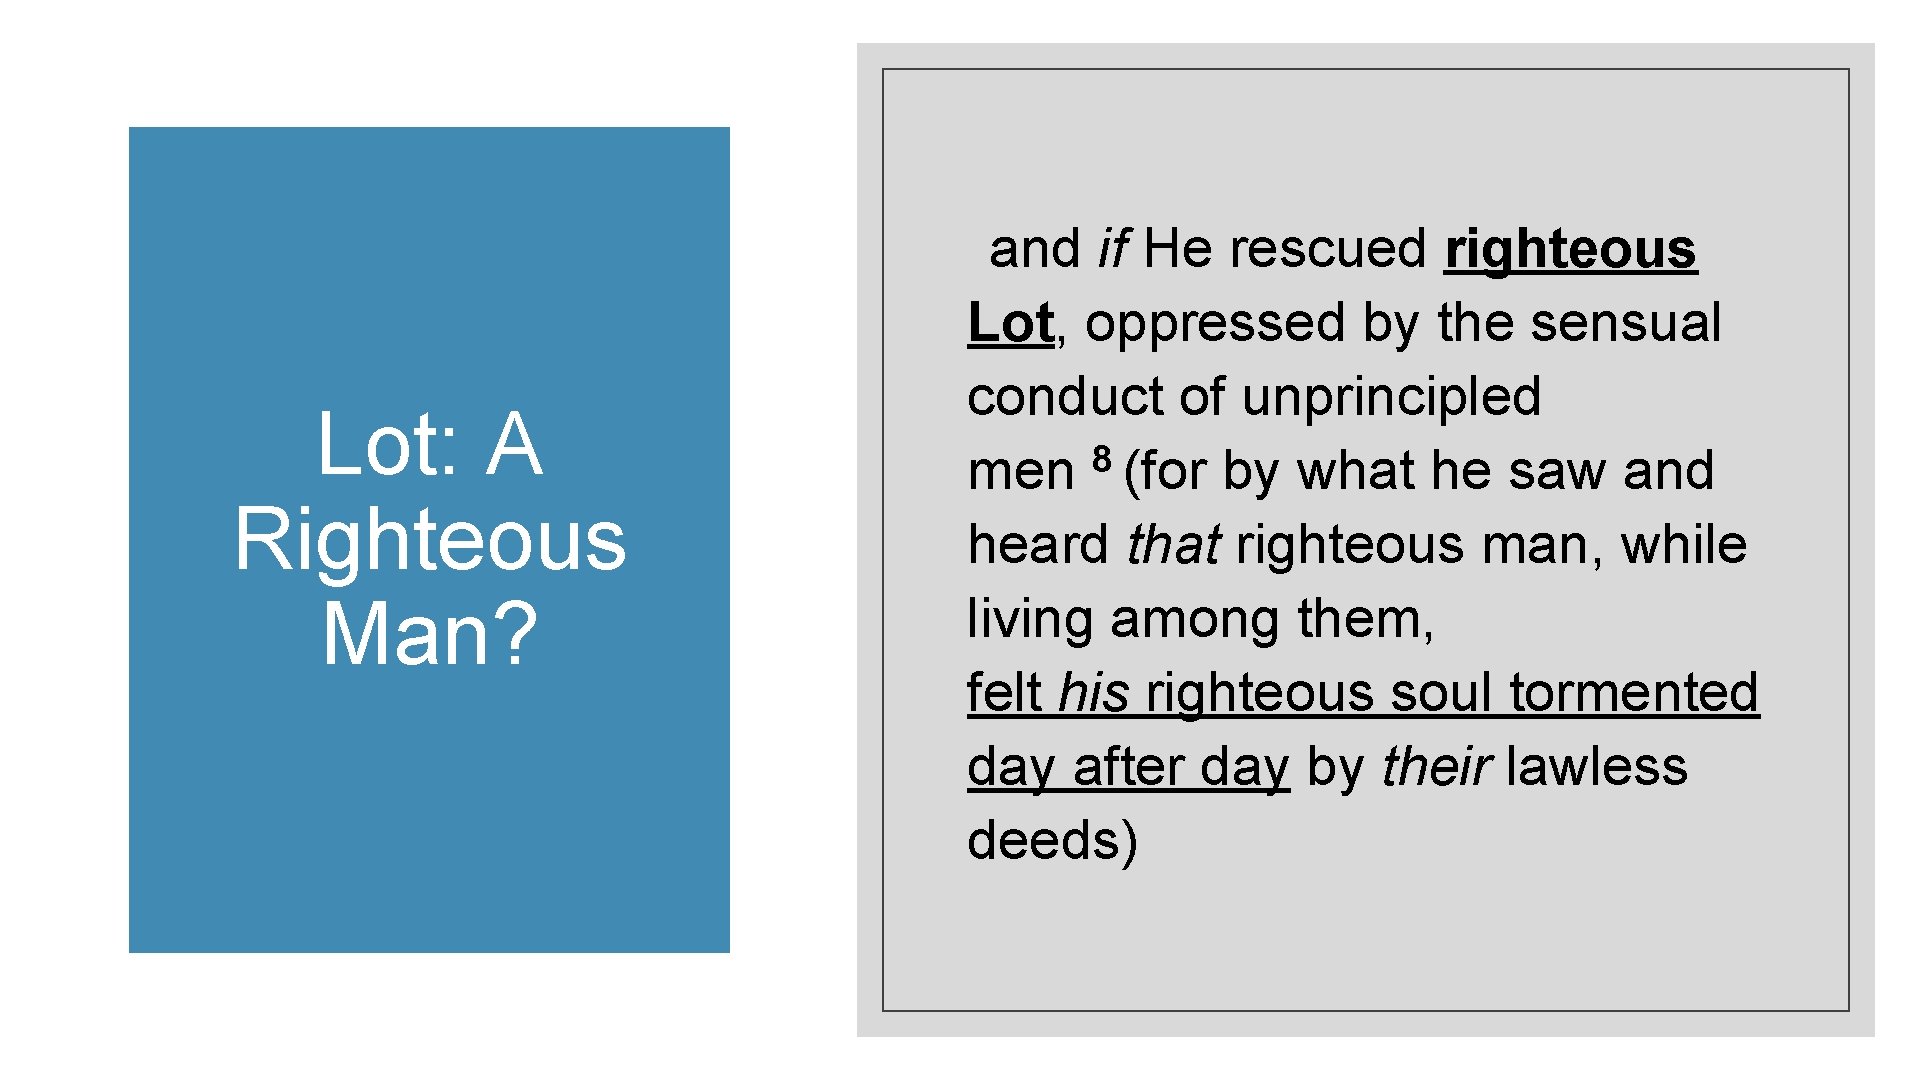 Lot: A Righteous Man? and if He rescued righteous Lot, oppressed by the sensual